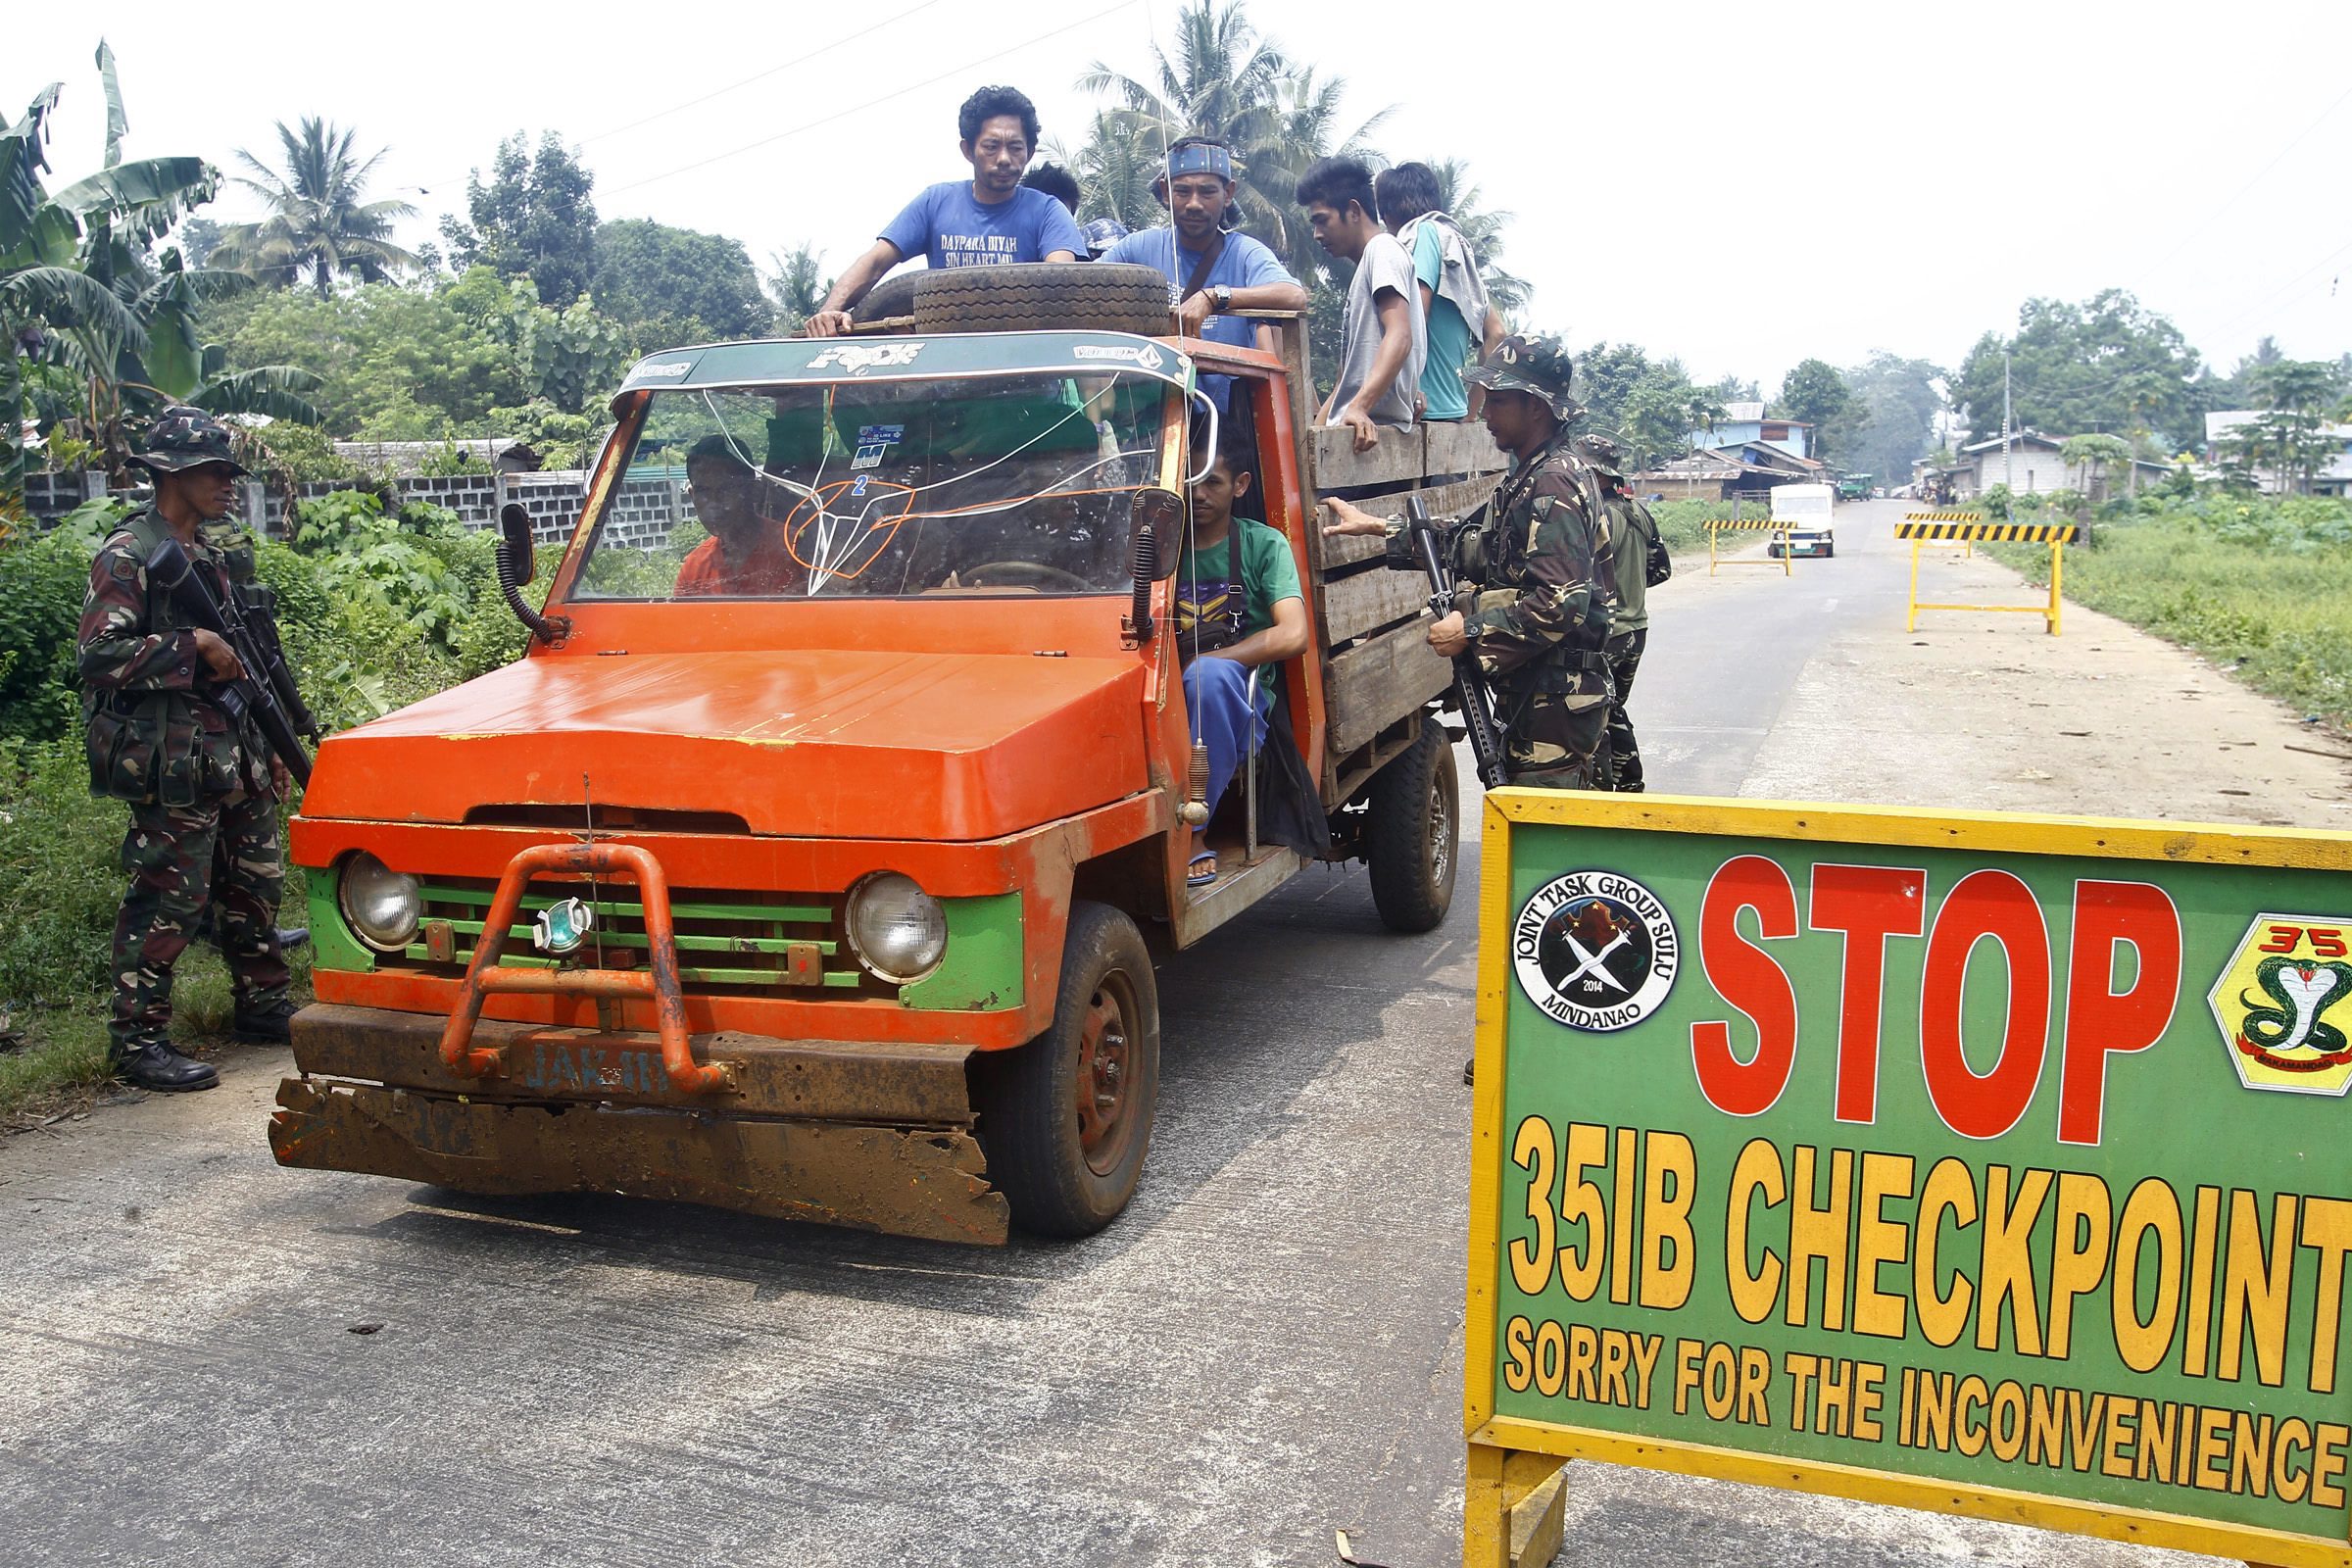 epa04944300 Filipino soldiers conduct inspections on a vehicle at a military checkpoint on the outskirts of Jolo, Sulu island, southern Philippines, 23 September 2015. Two Canadian citizens and a Norwegian resort manager were abducted by unidentified gunmen on an island in the southern Philippines, police and military said. A Filipino woman, the girlfriend of one of the foreigners was also taken from the resort on Samal Island, 980km south of Manila, regional military spokesman Captain Alberto Caber said. Caber identified the foreign hostages as John Ridsdel, 68, a consultant with Canadian mining company TVI Pacific Inc; Canadian Robert Hall, 60; and Norwegian Kjartan Sekkingstad, 56. Samal Island, known for its powdery sand beaches and pristine diving spots, is one of the tourism destinations in the province of Davao Del Norte. In 2001, al-Qaeda-linked Abu Sayyaf extremists tried but failed to abduct tourists from Samal Islands's Pearl Farm Resort. EPA/BEN HAJAN